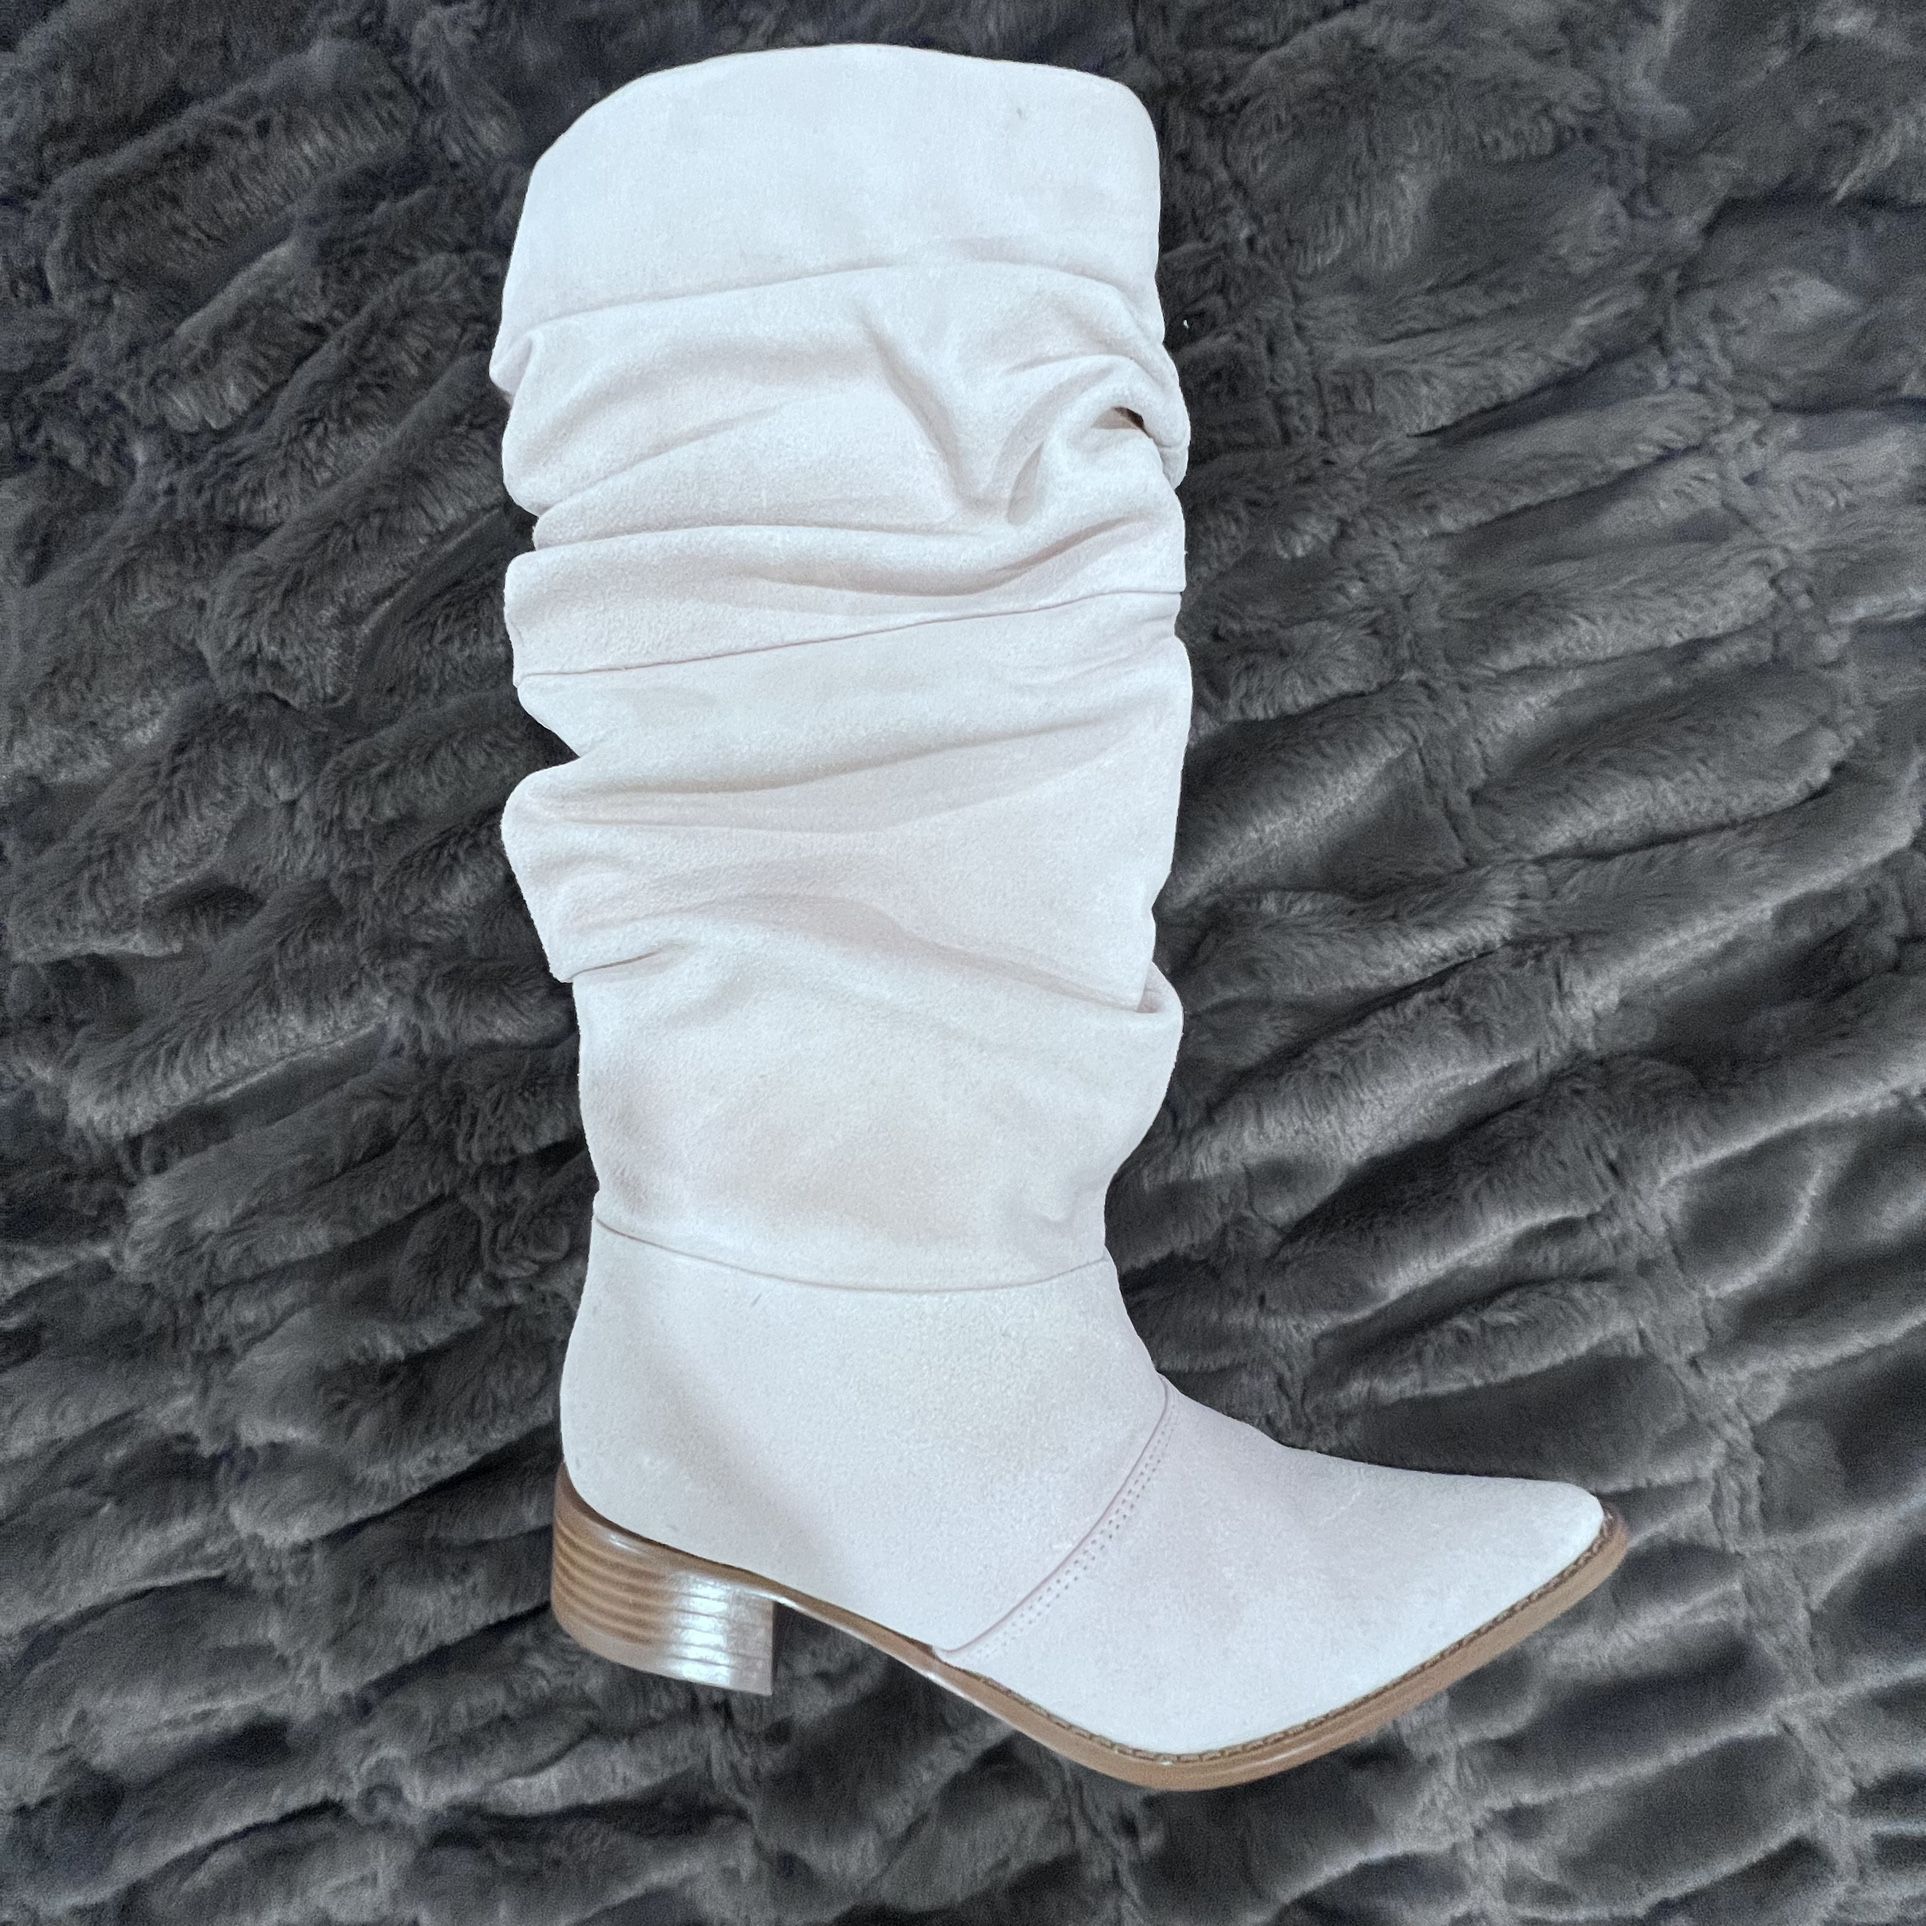 Chinese Laundry Woman's Cowgirl Boots 